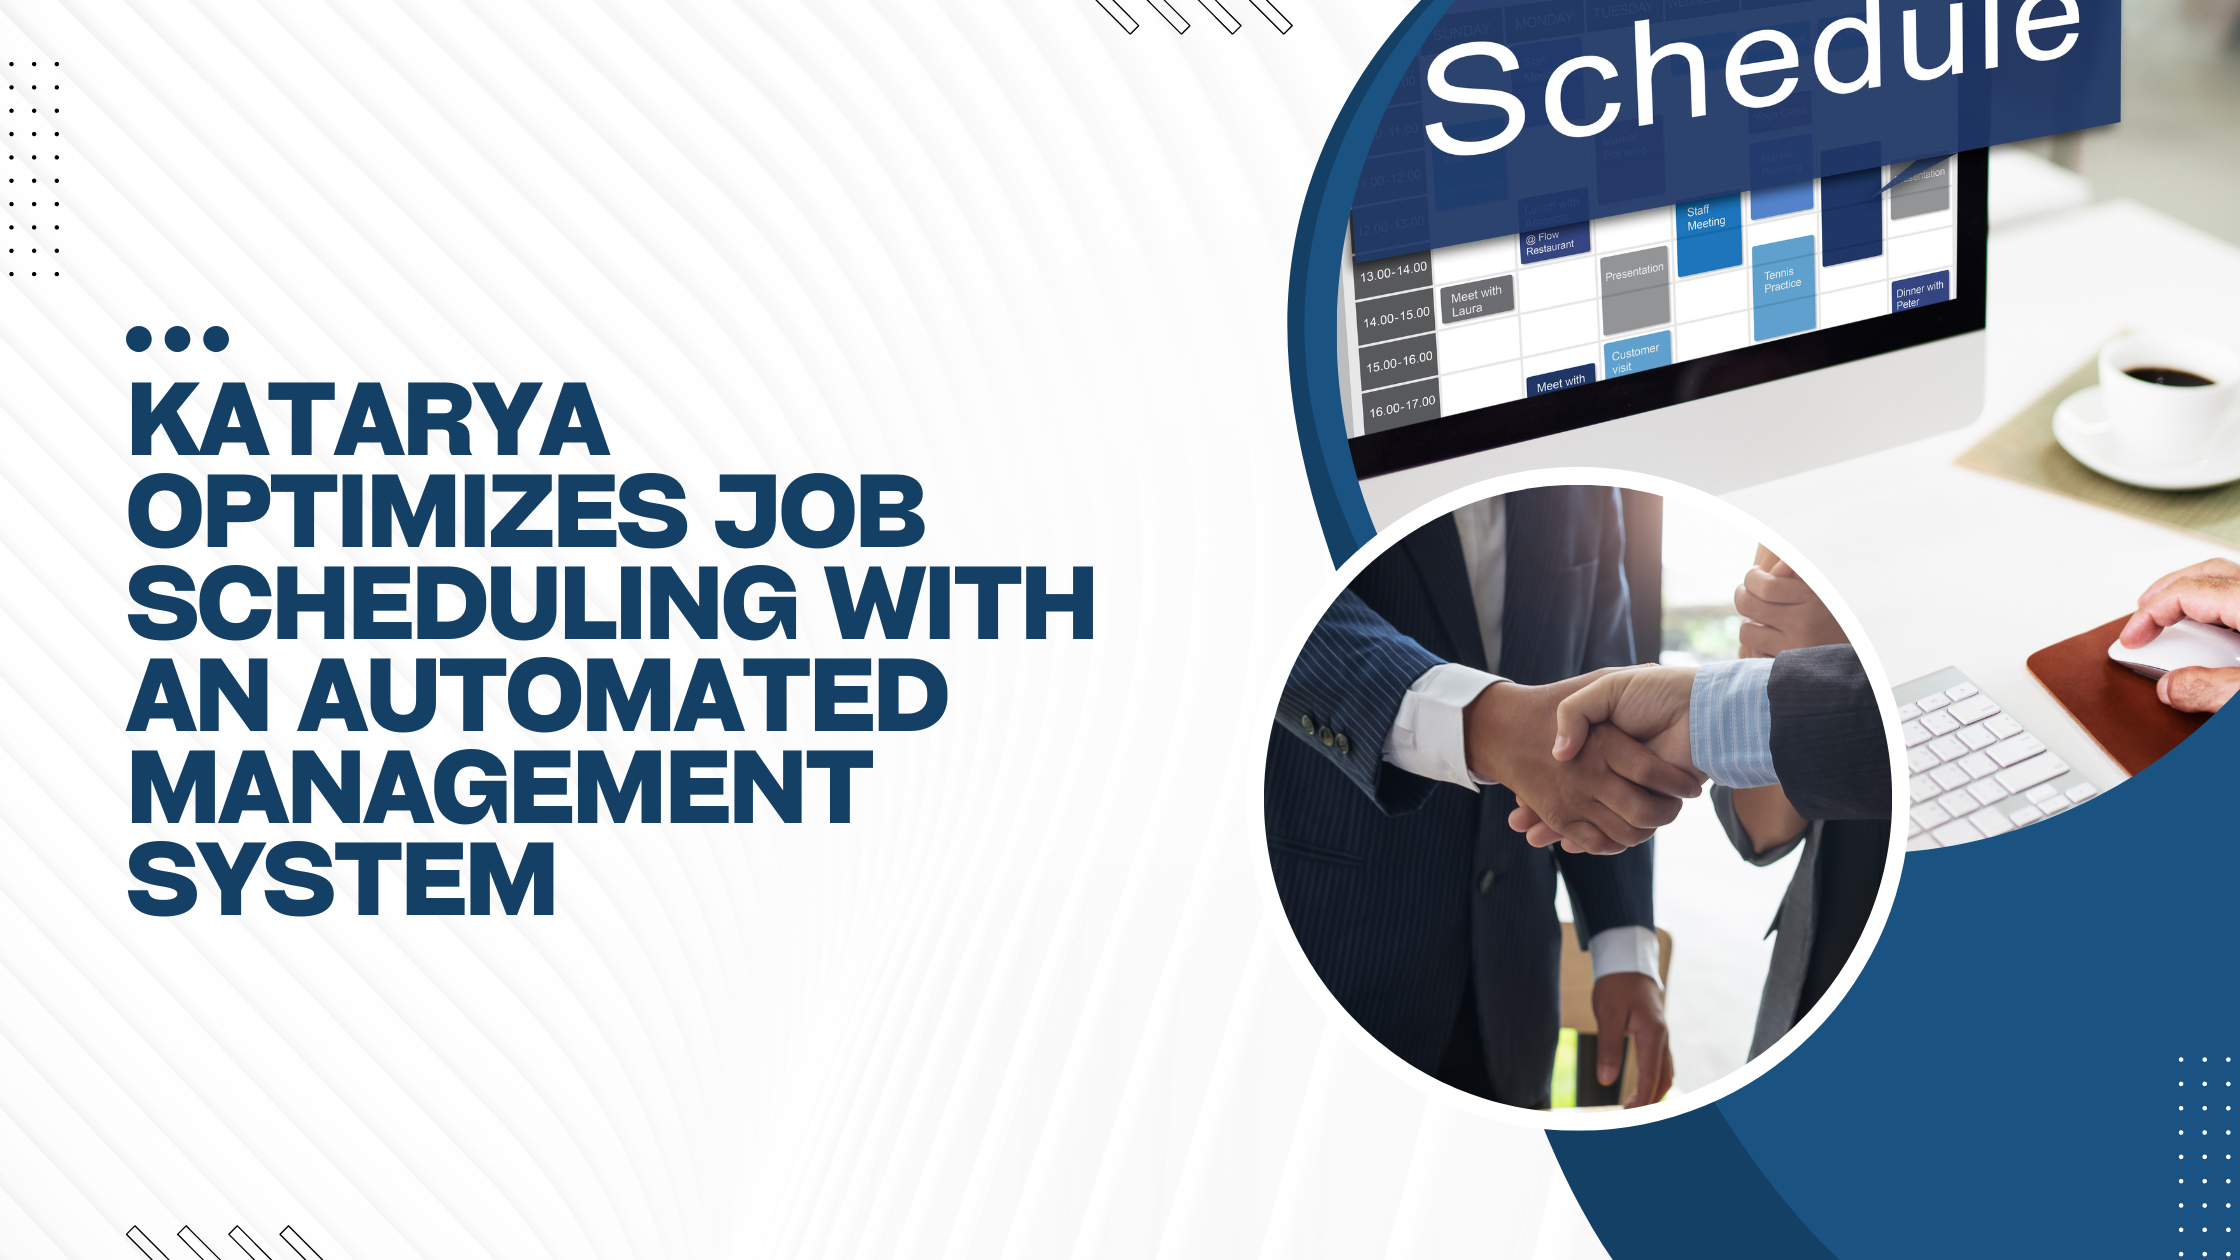 Katarya Optimizes Job Scheduling with an Automated Management System 